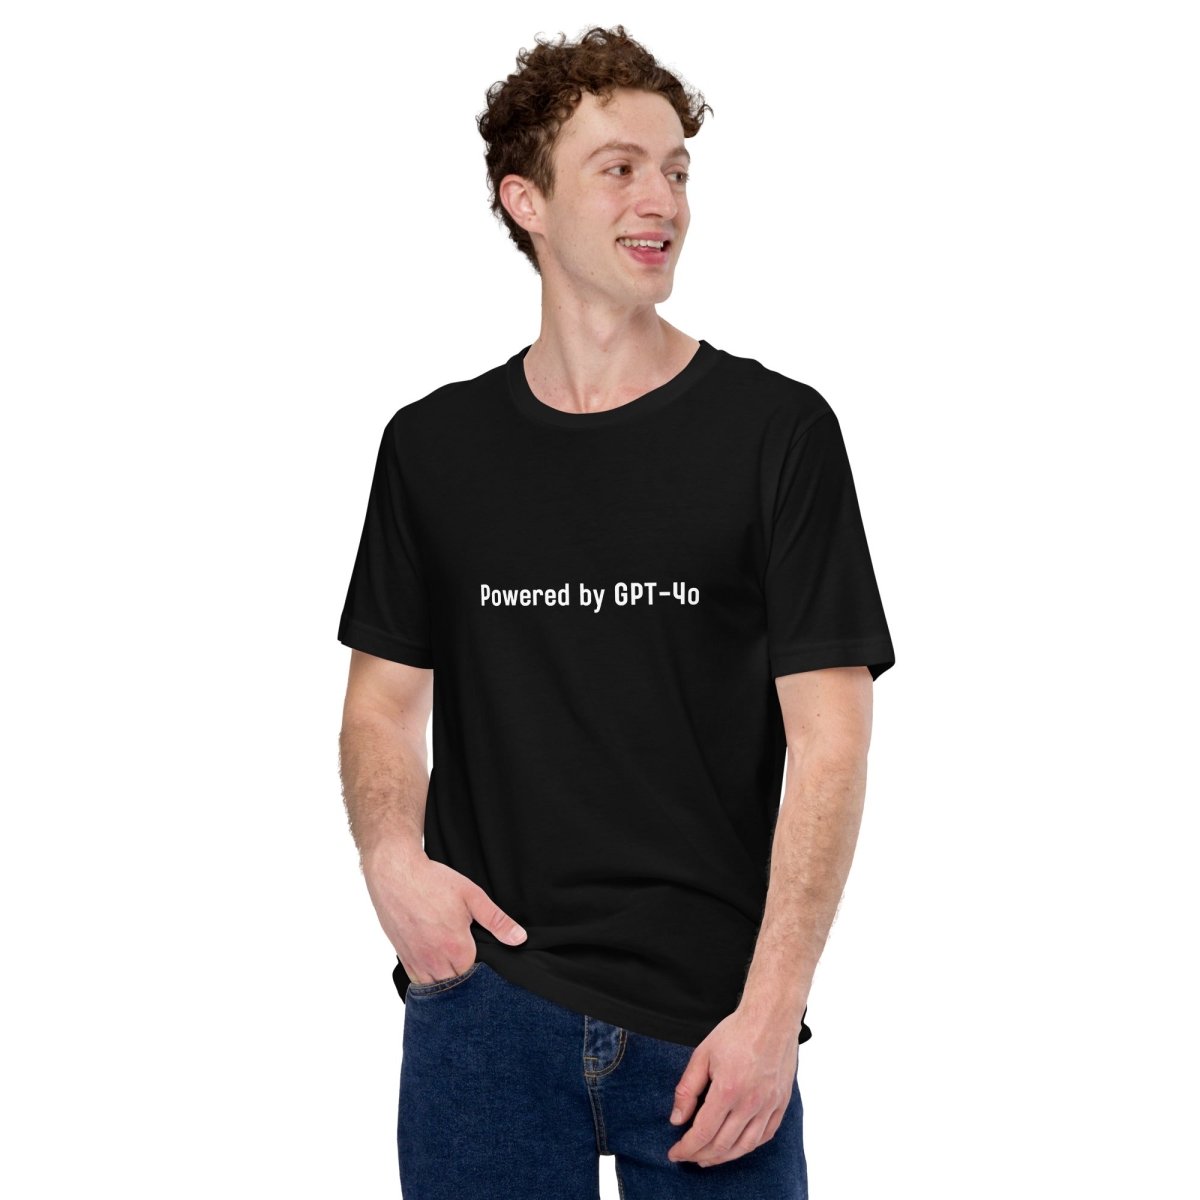 Powered by GPT - 4o T - Shirt 3 (unisex) - Black - AI Store